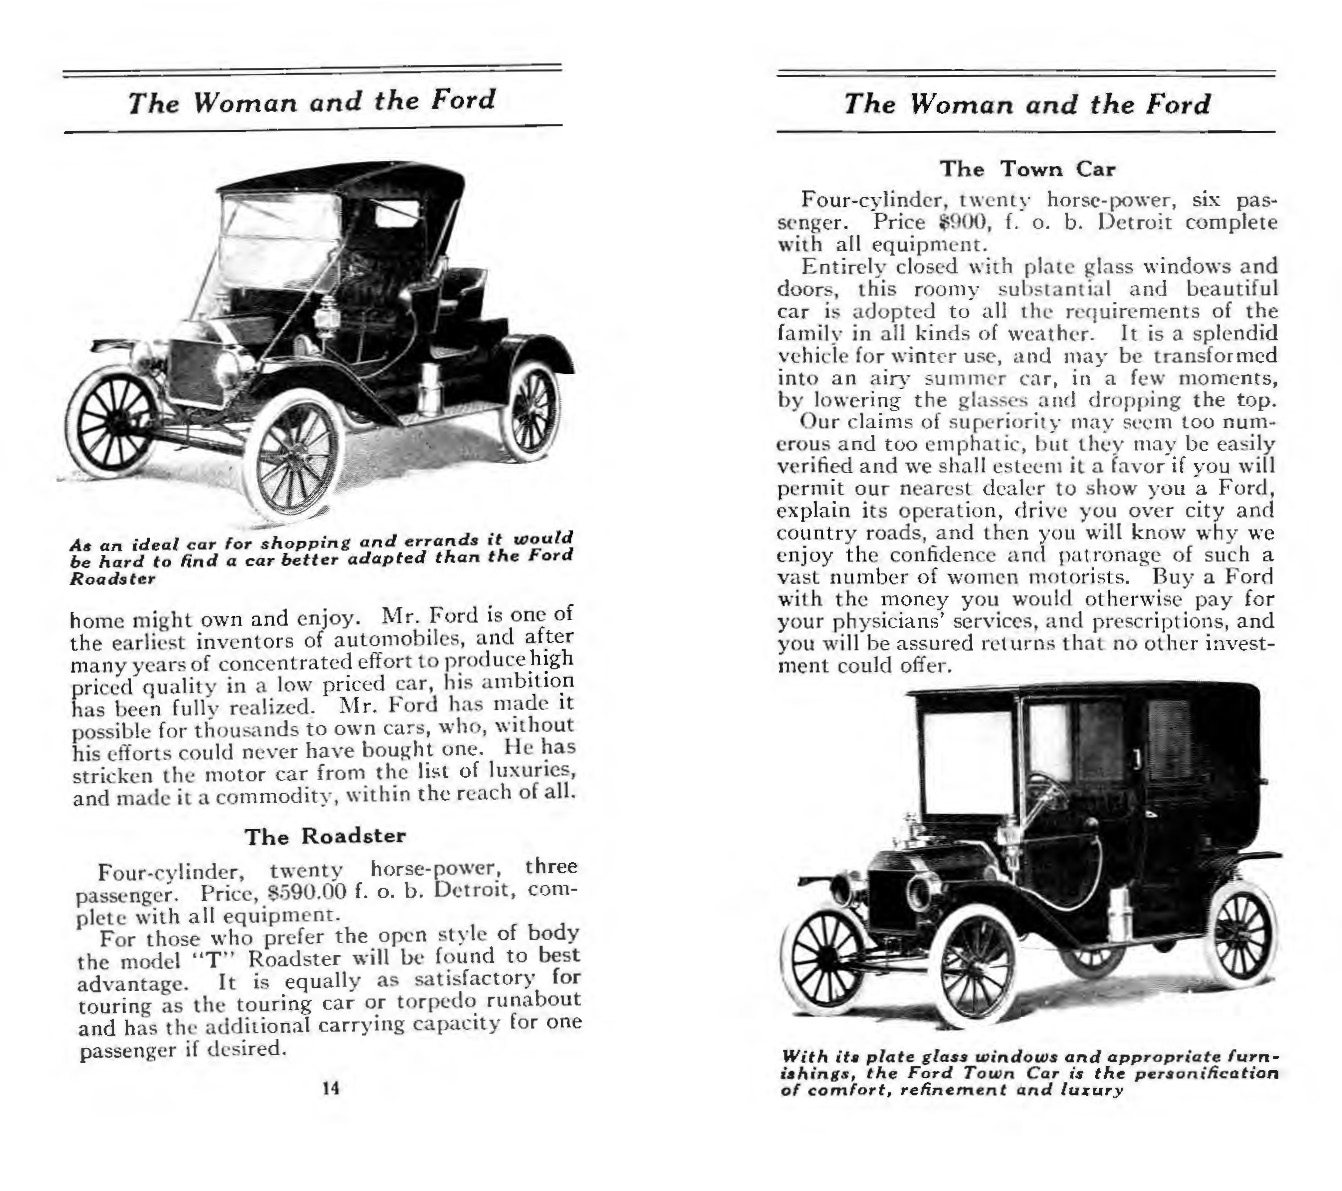 n_1912 The Woman & the Ford-14-15.jpg